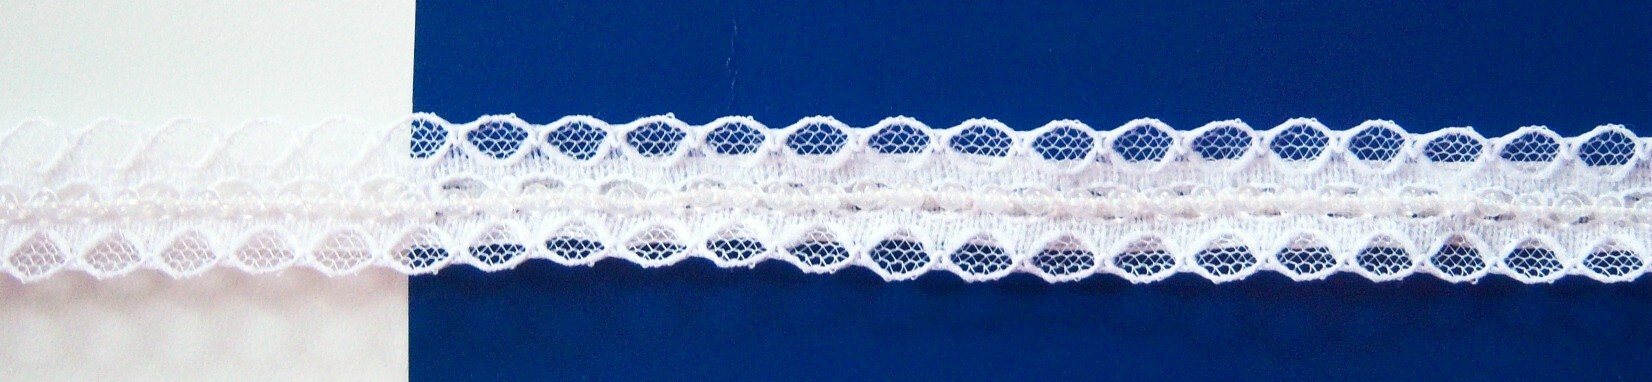 White 11/16" Lace/Clear Beads